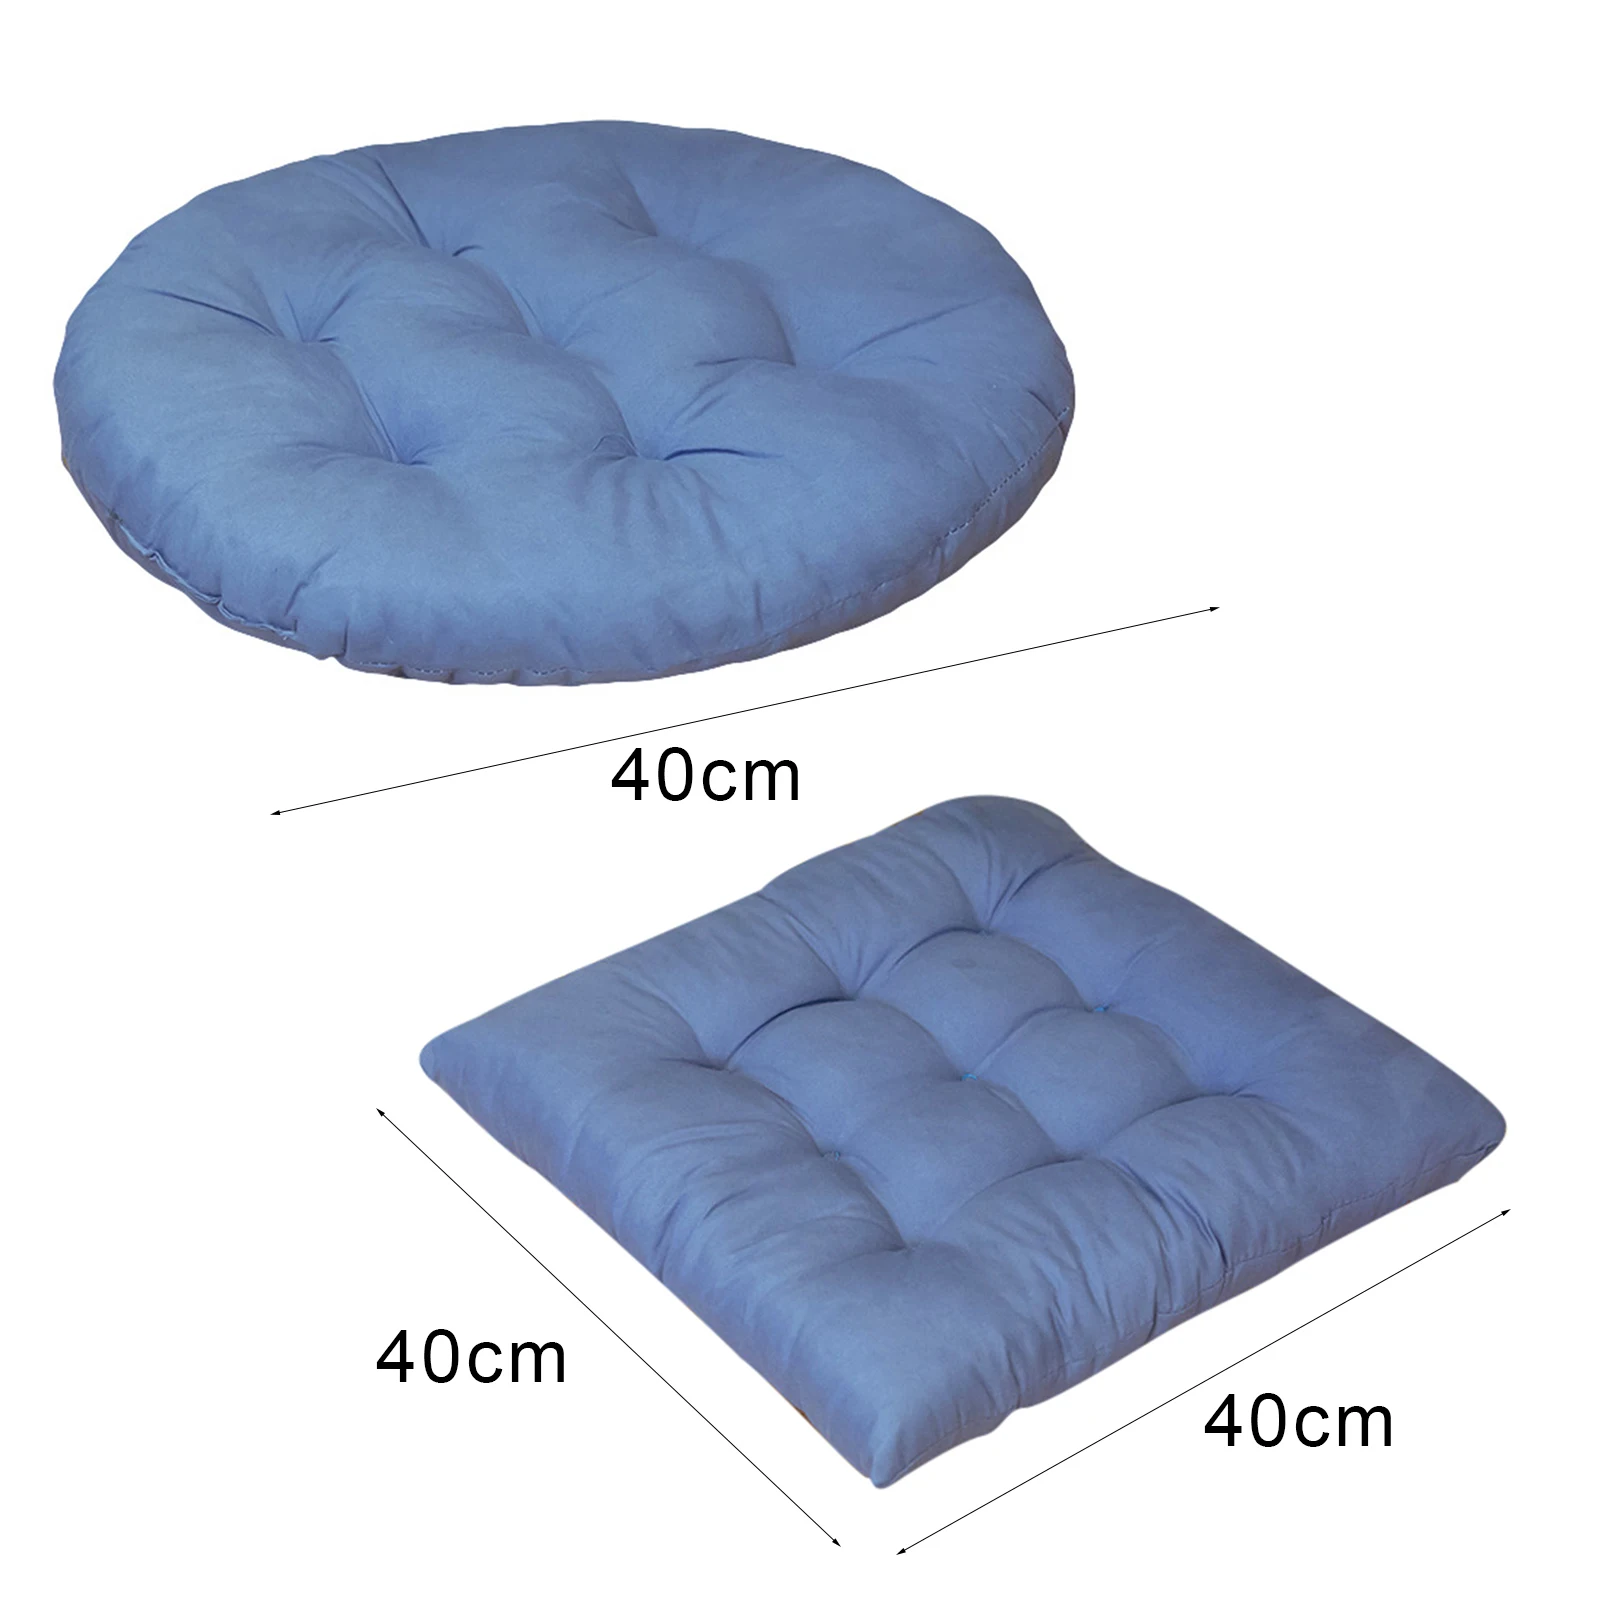 https://ae01.alicdn.com/kf/Sd3ced0ade3fa421798599f366b9c5711n/Round-Square-Car-Chair-Cushion-Students-Office-Seat-Pad-Simple-Wrinkle-Resistant-Soft-Chair-Cushion-Floor.jpg